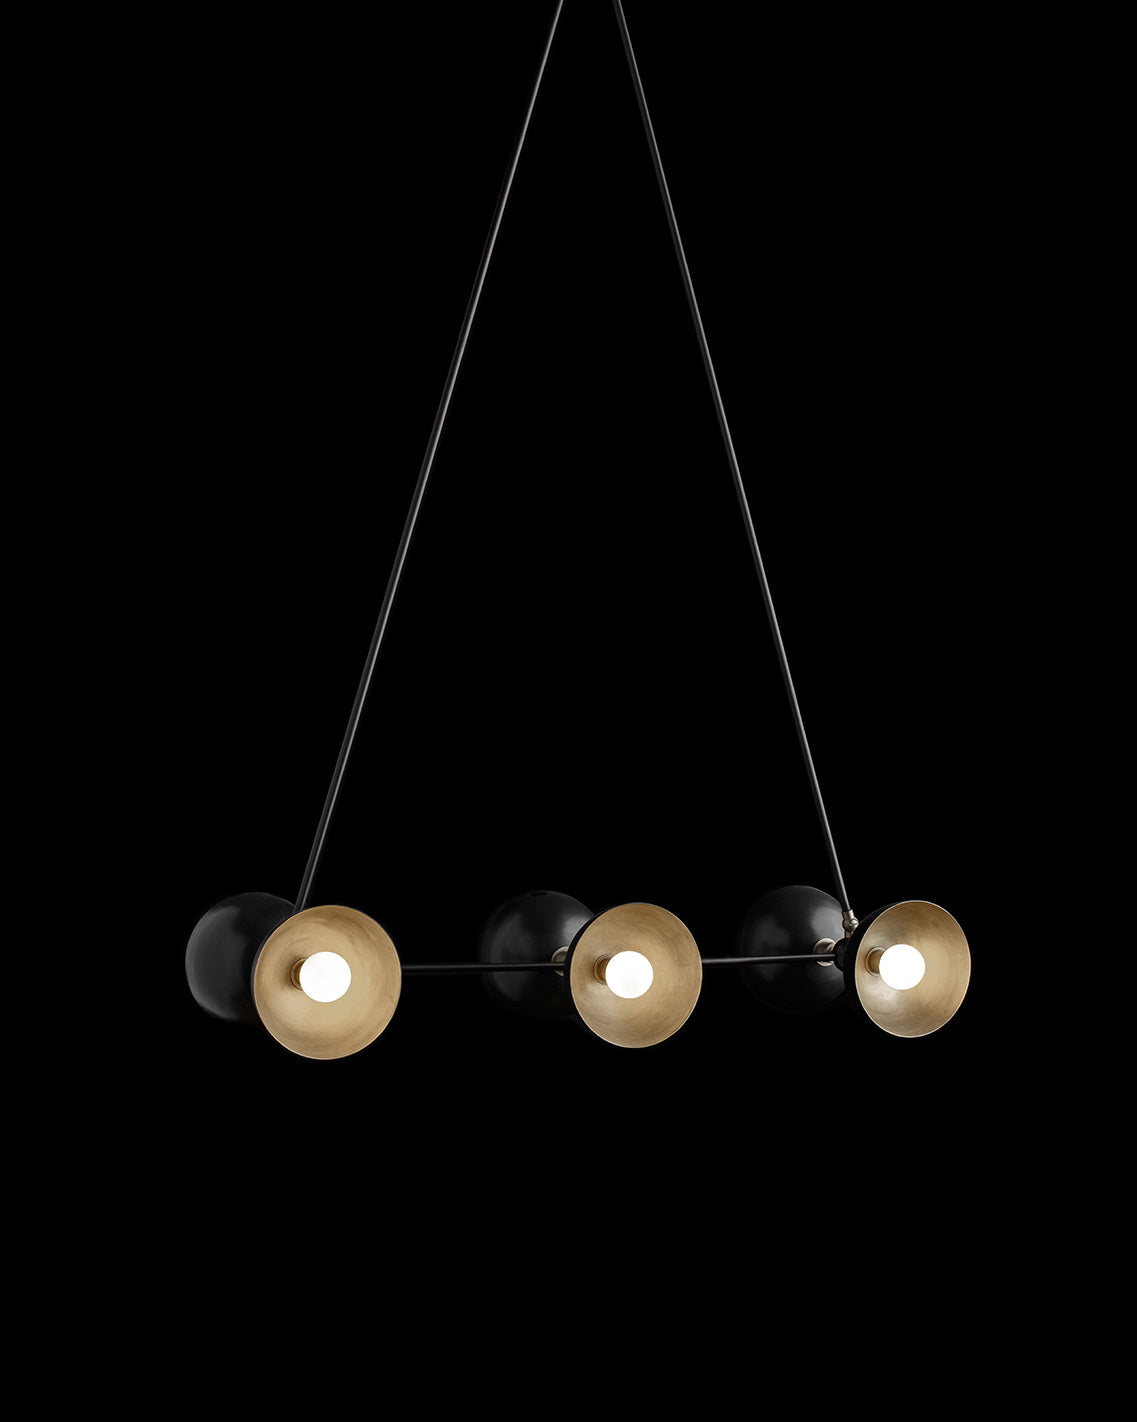 TRAPEZE : 6 ceiling pendant in Blackened Brass finish with Aged Brass bowls, hanging against a black background. 